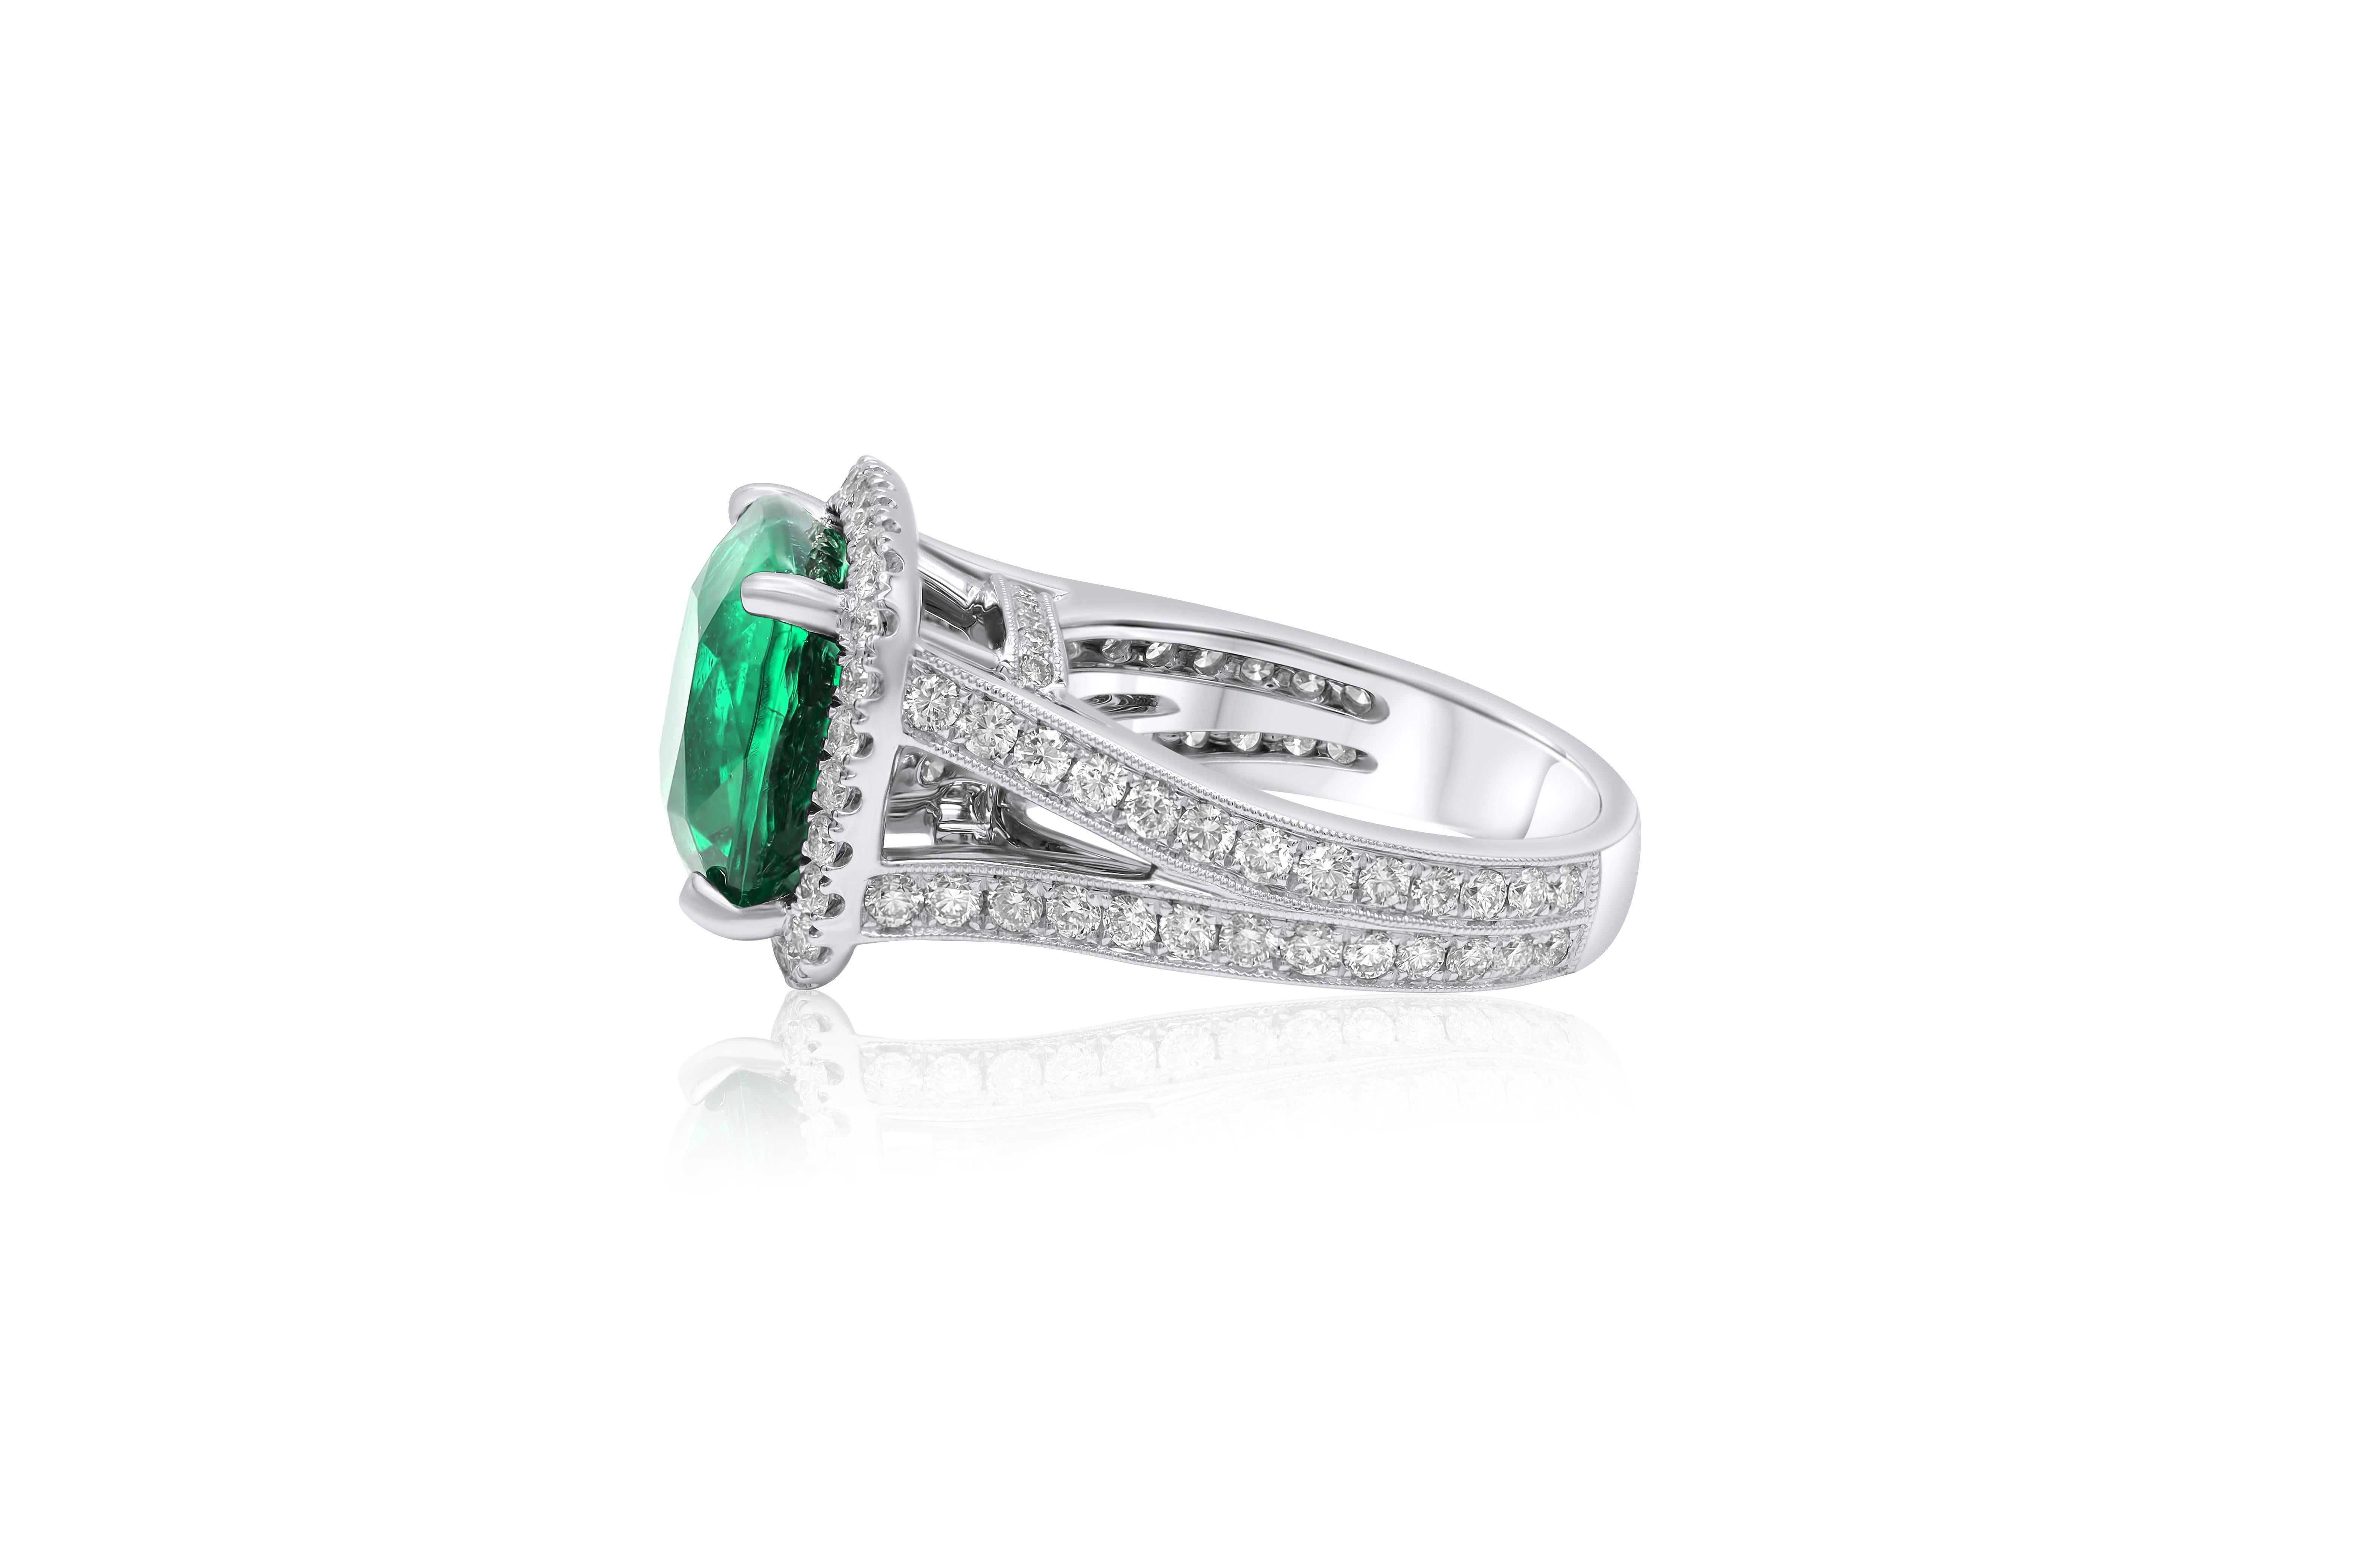 Emerald Cut Diana M. 18 kt white gold emerald diamond ring featuring a 6.63 ct  For Sale